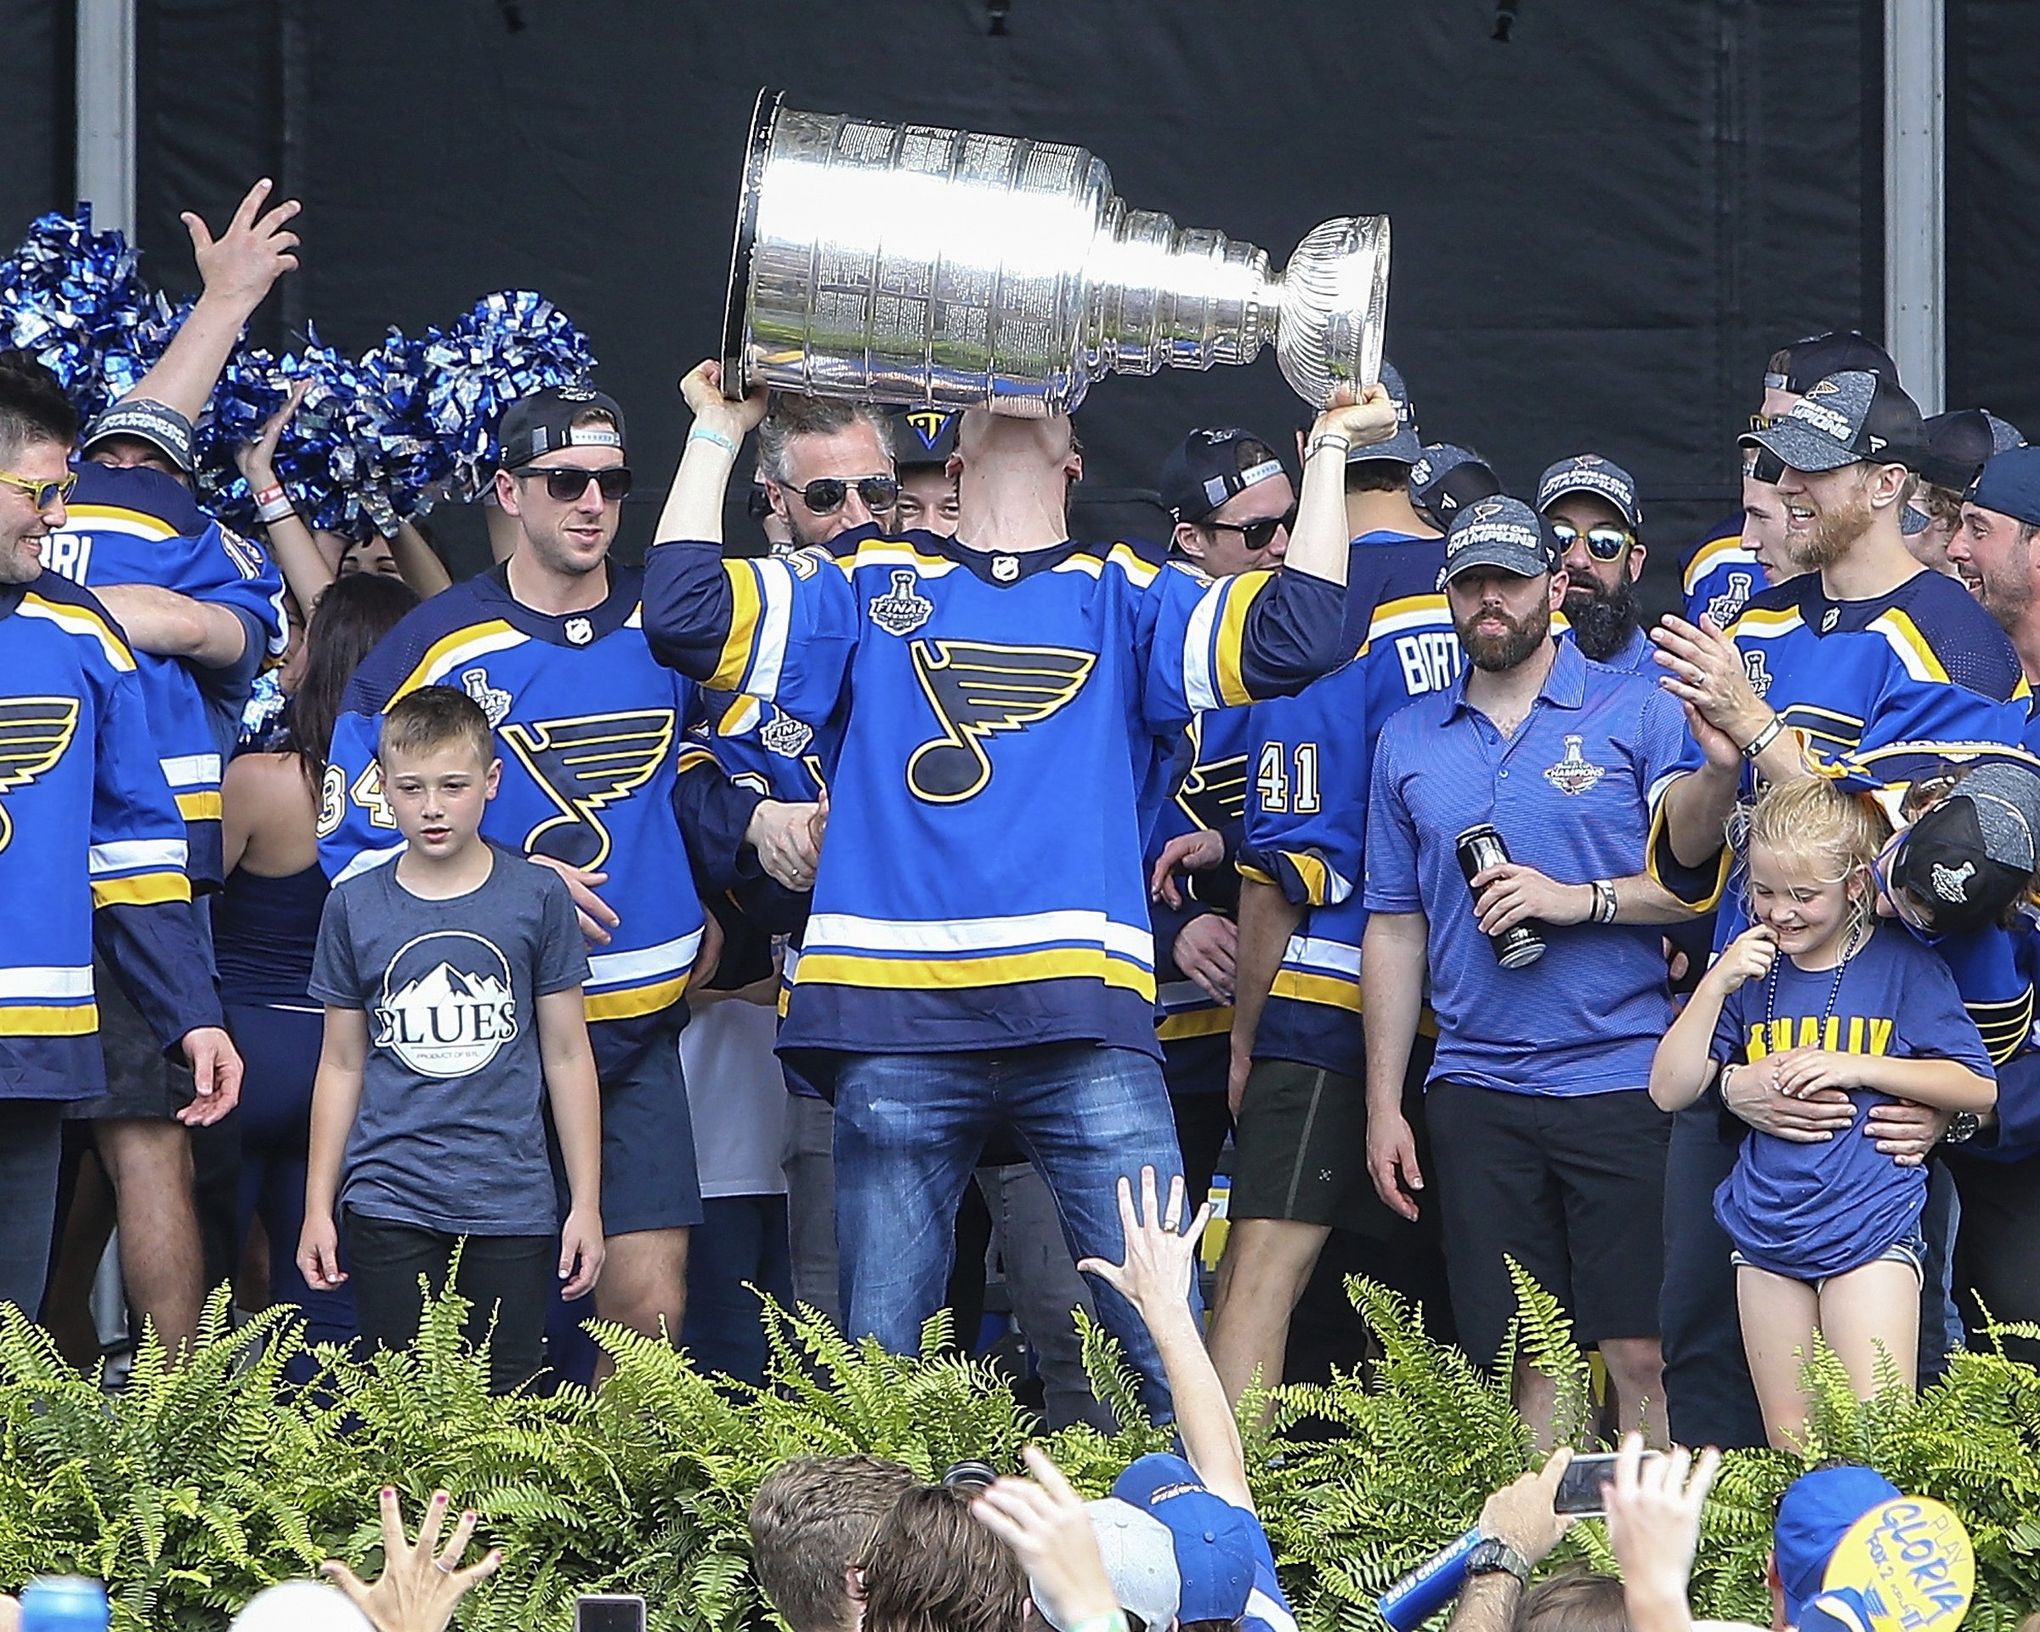 London celebrates local connections as St. Louis Blues win Stanley